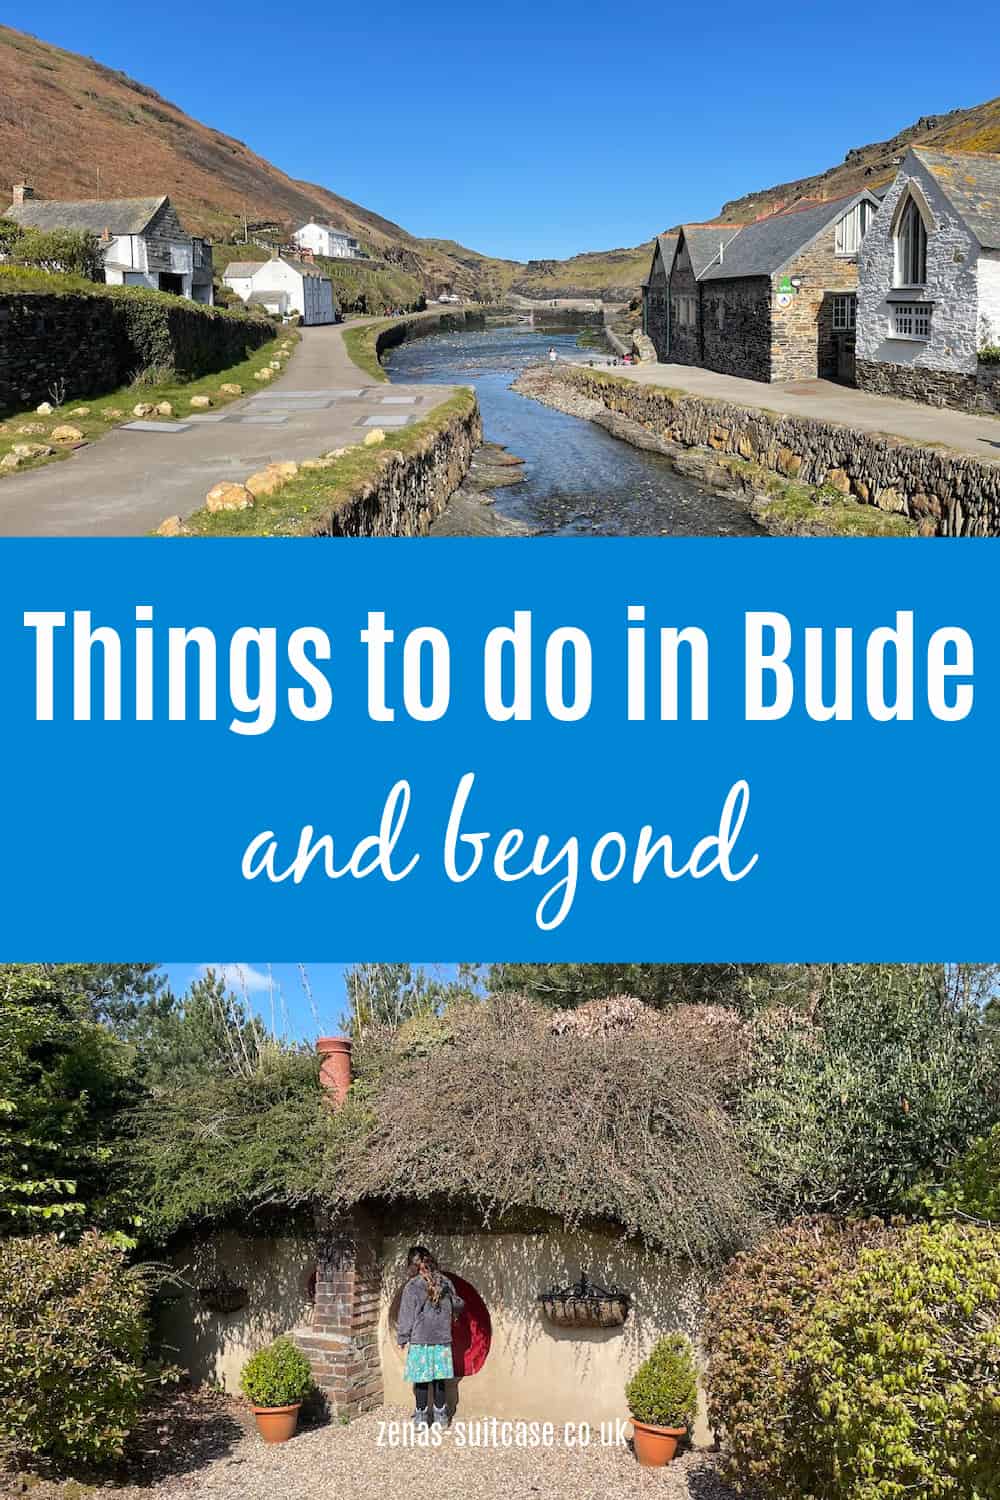 Things to do near Bude - Holiday inspiration for your trip to North Cornwall. Pin now for great places to visit near Bude